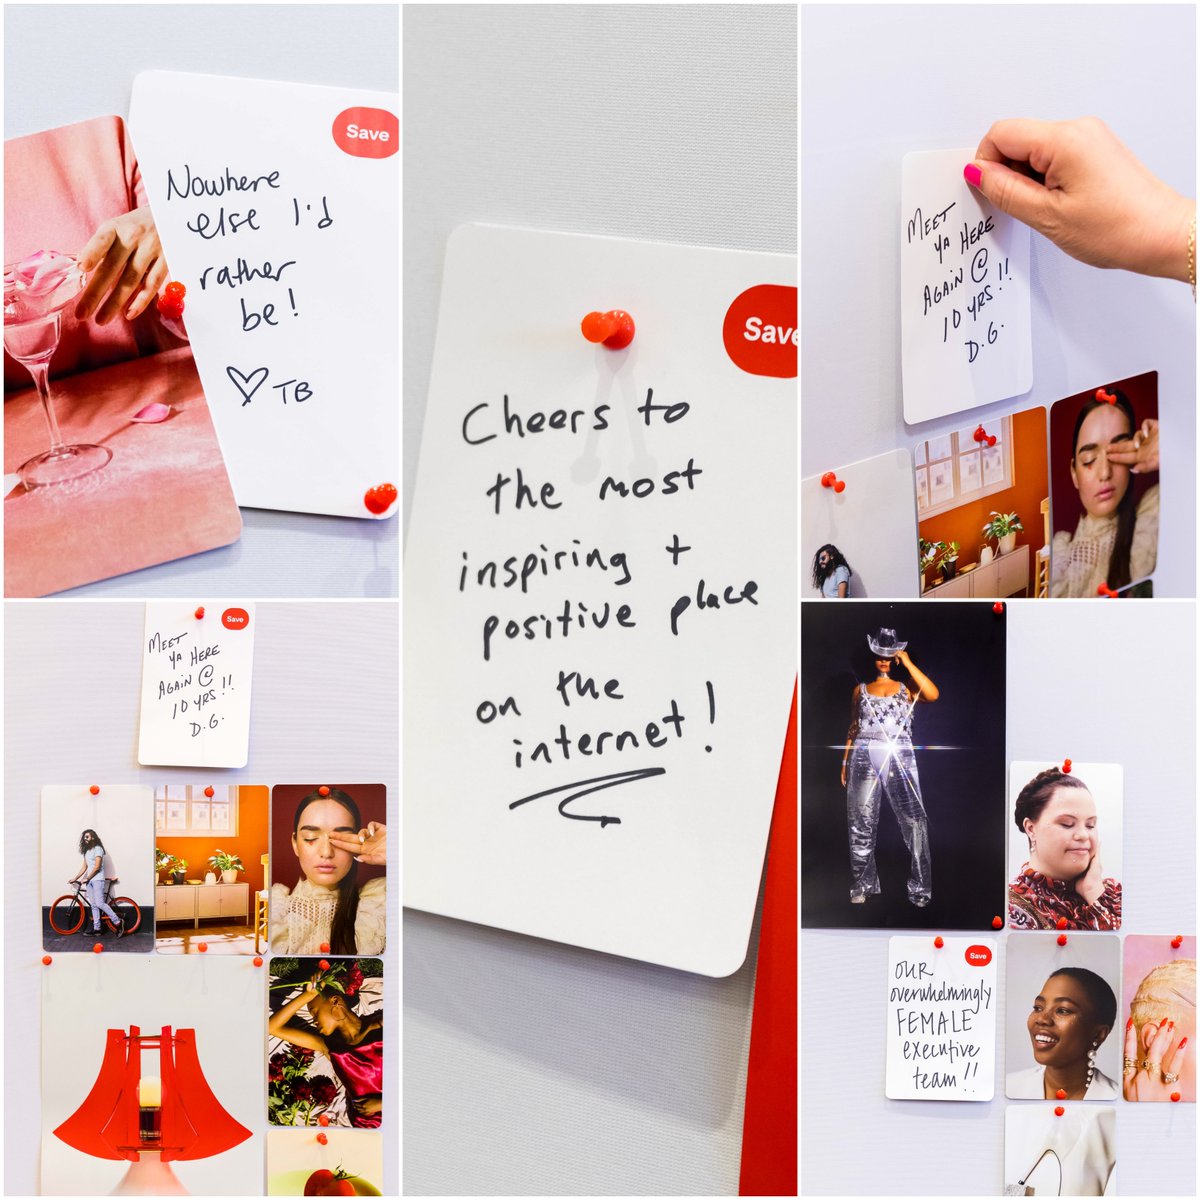 Get on board! 📌 @Pinterest celebrates its 5th anniversary of listing, continuing to build an inspiring and positive place online. $PINS @pinterestbiz